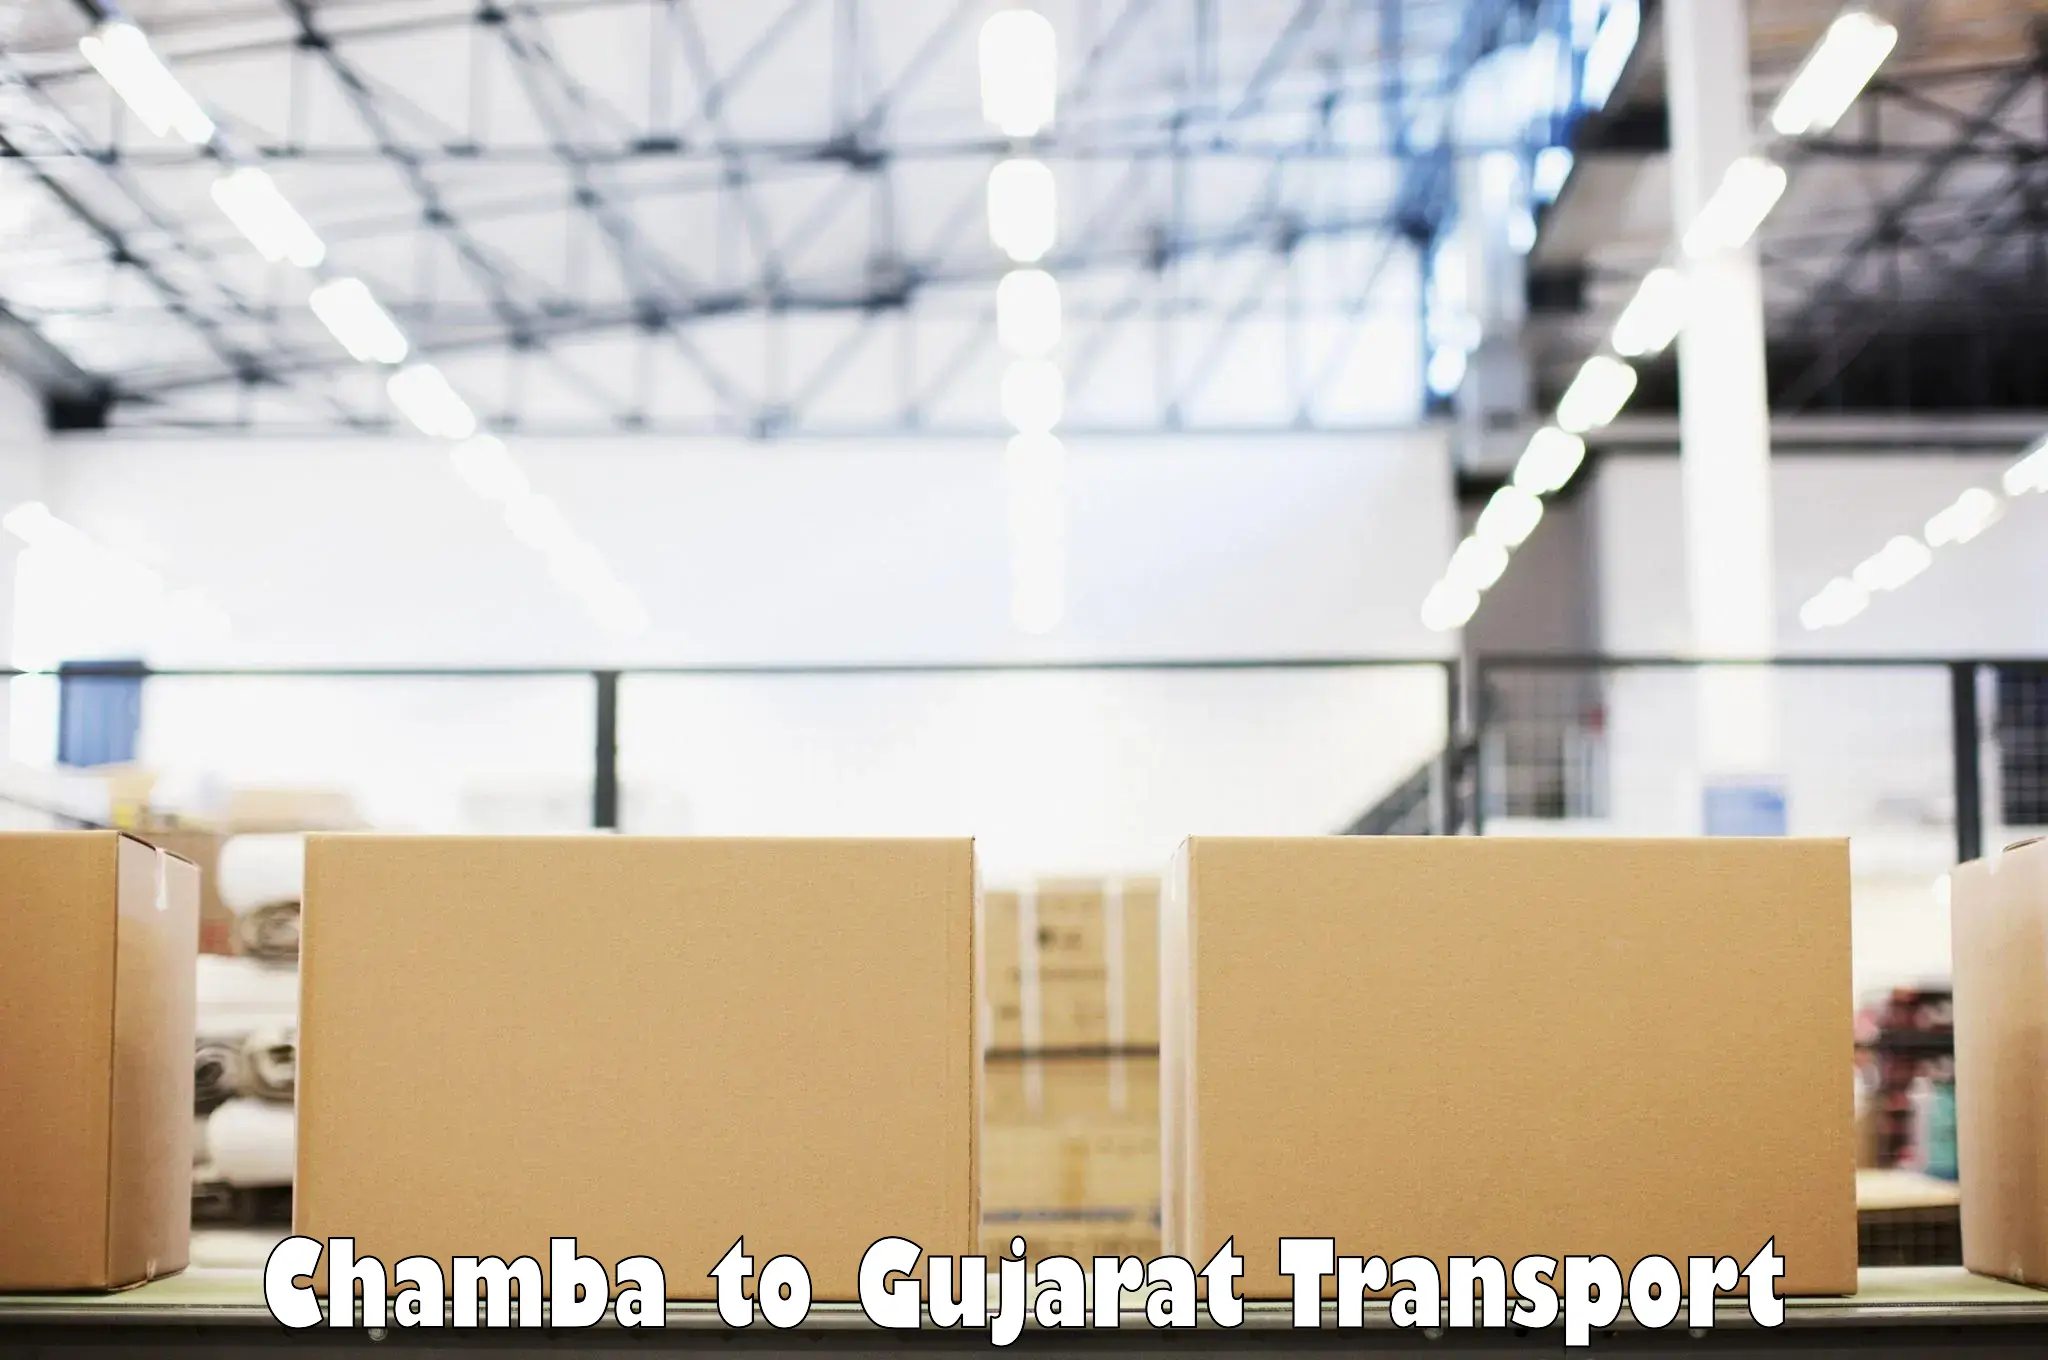 Transport shared services Chamba to Gujarat